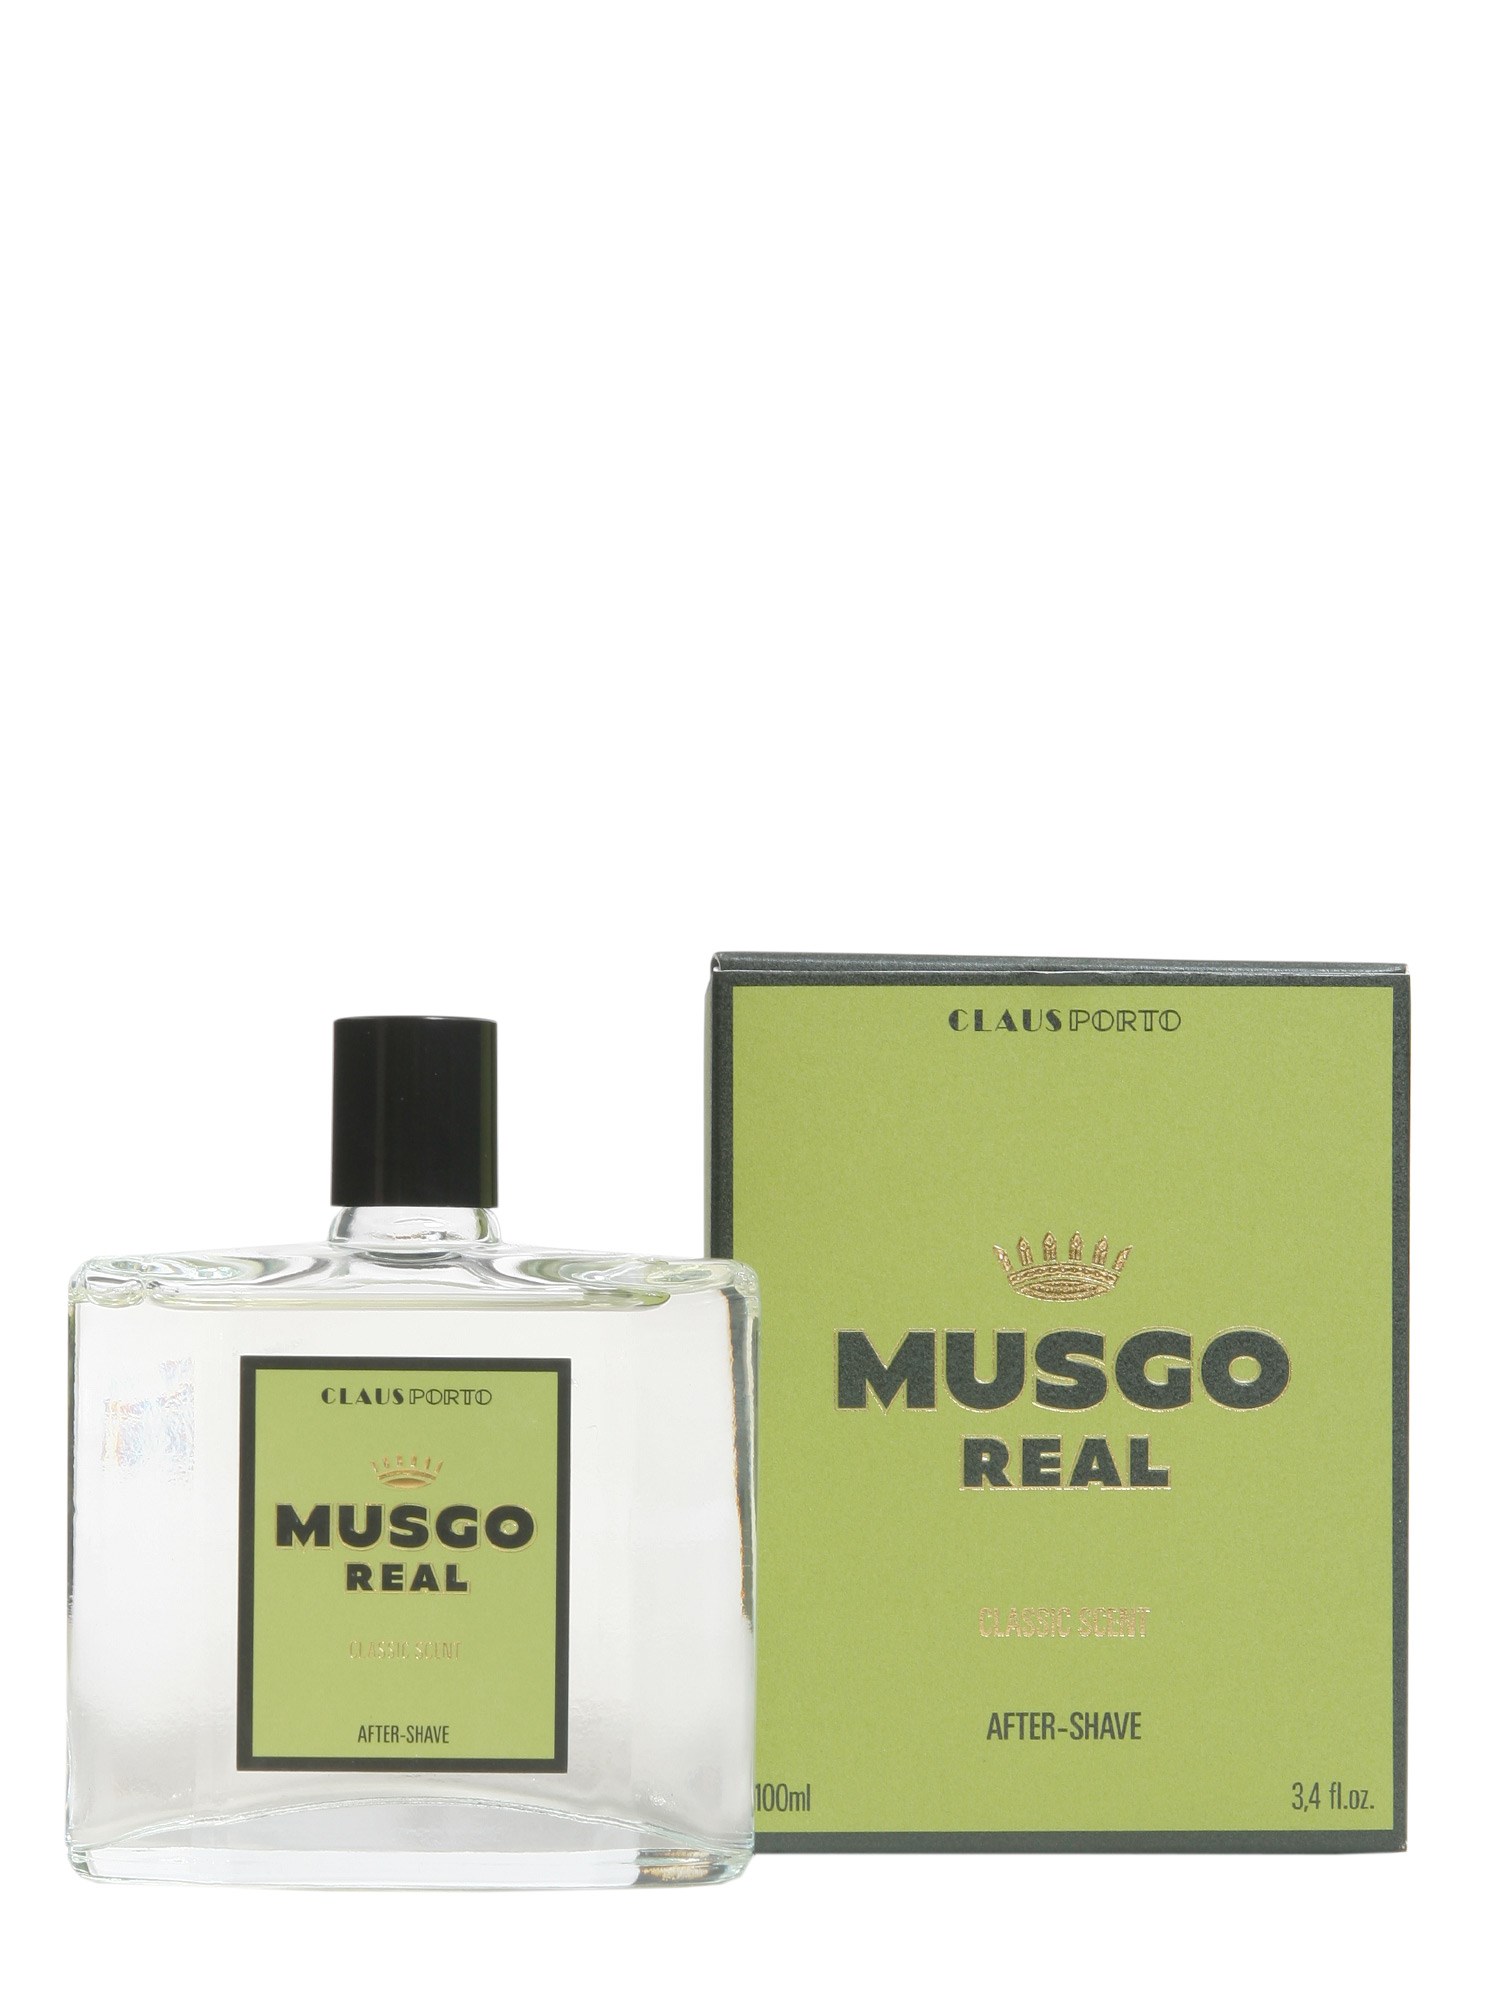 musgo real classic scent splash aftershave